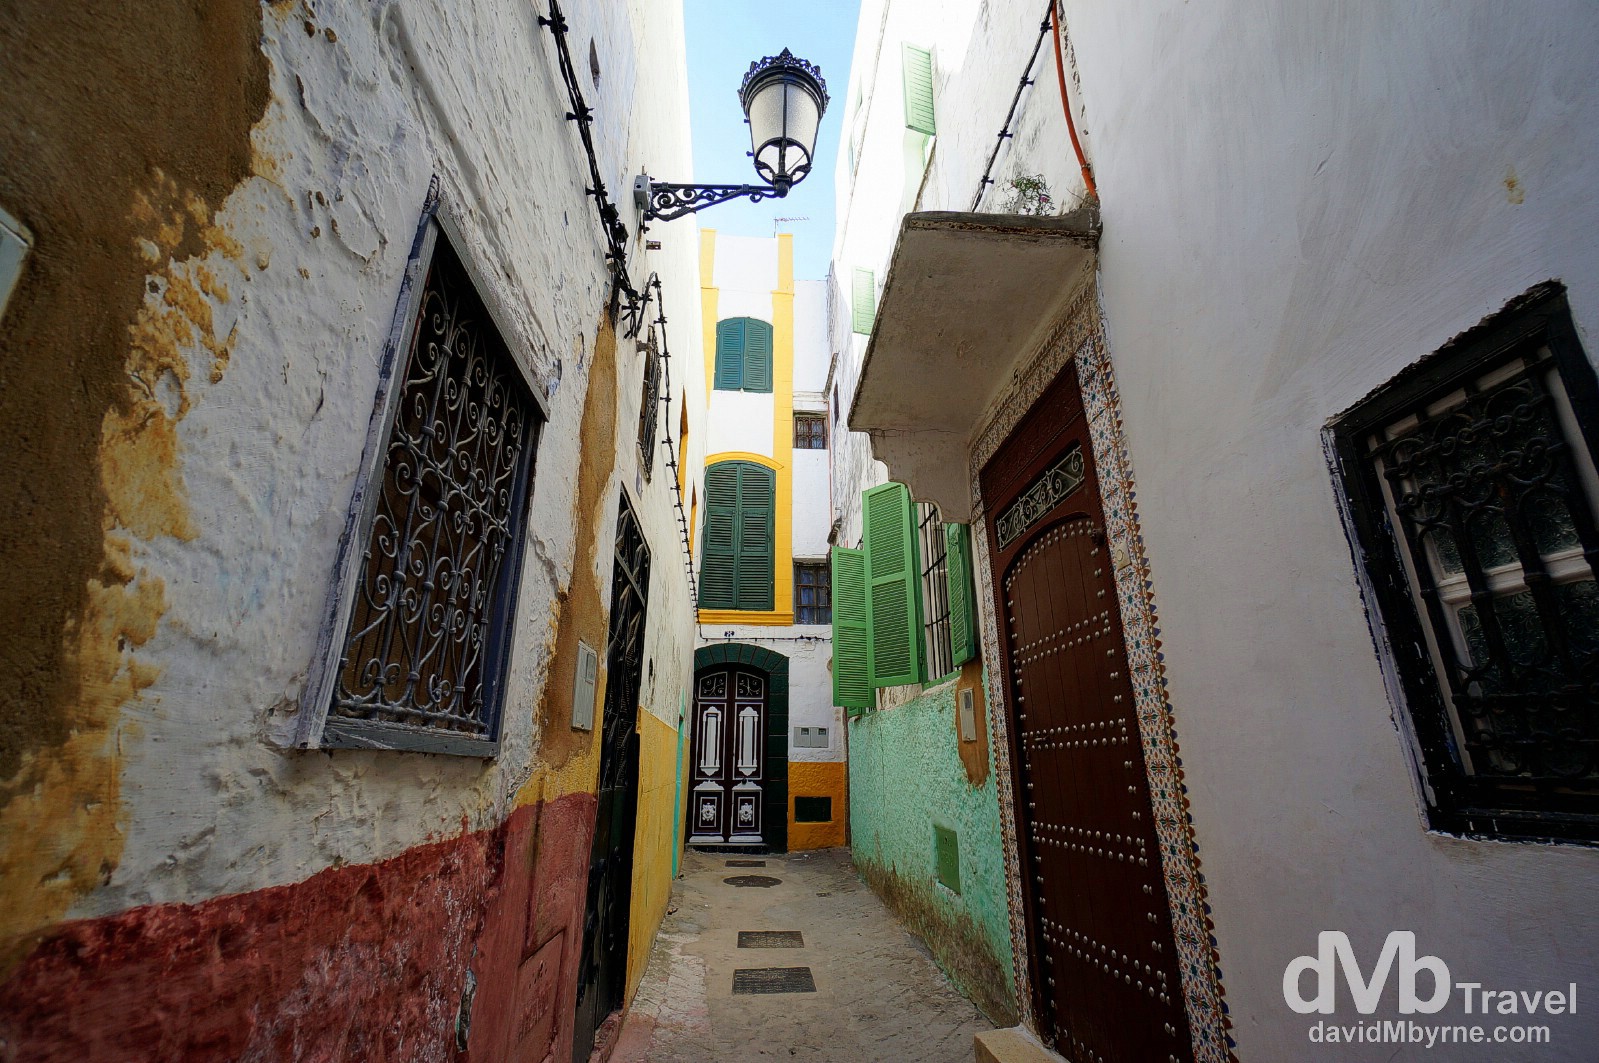 Andalusian overtones in a narrow lane in the UNESCO-listed medina of Tetouan, Morocco. June 2nd, 2014.